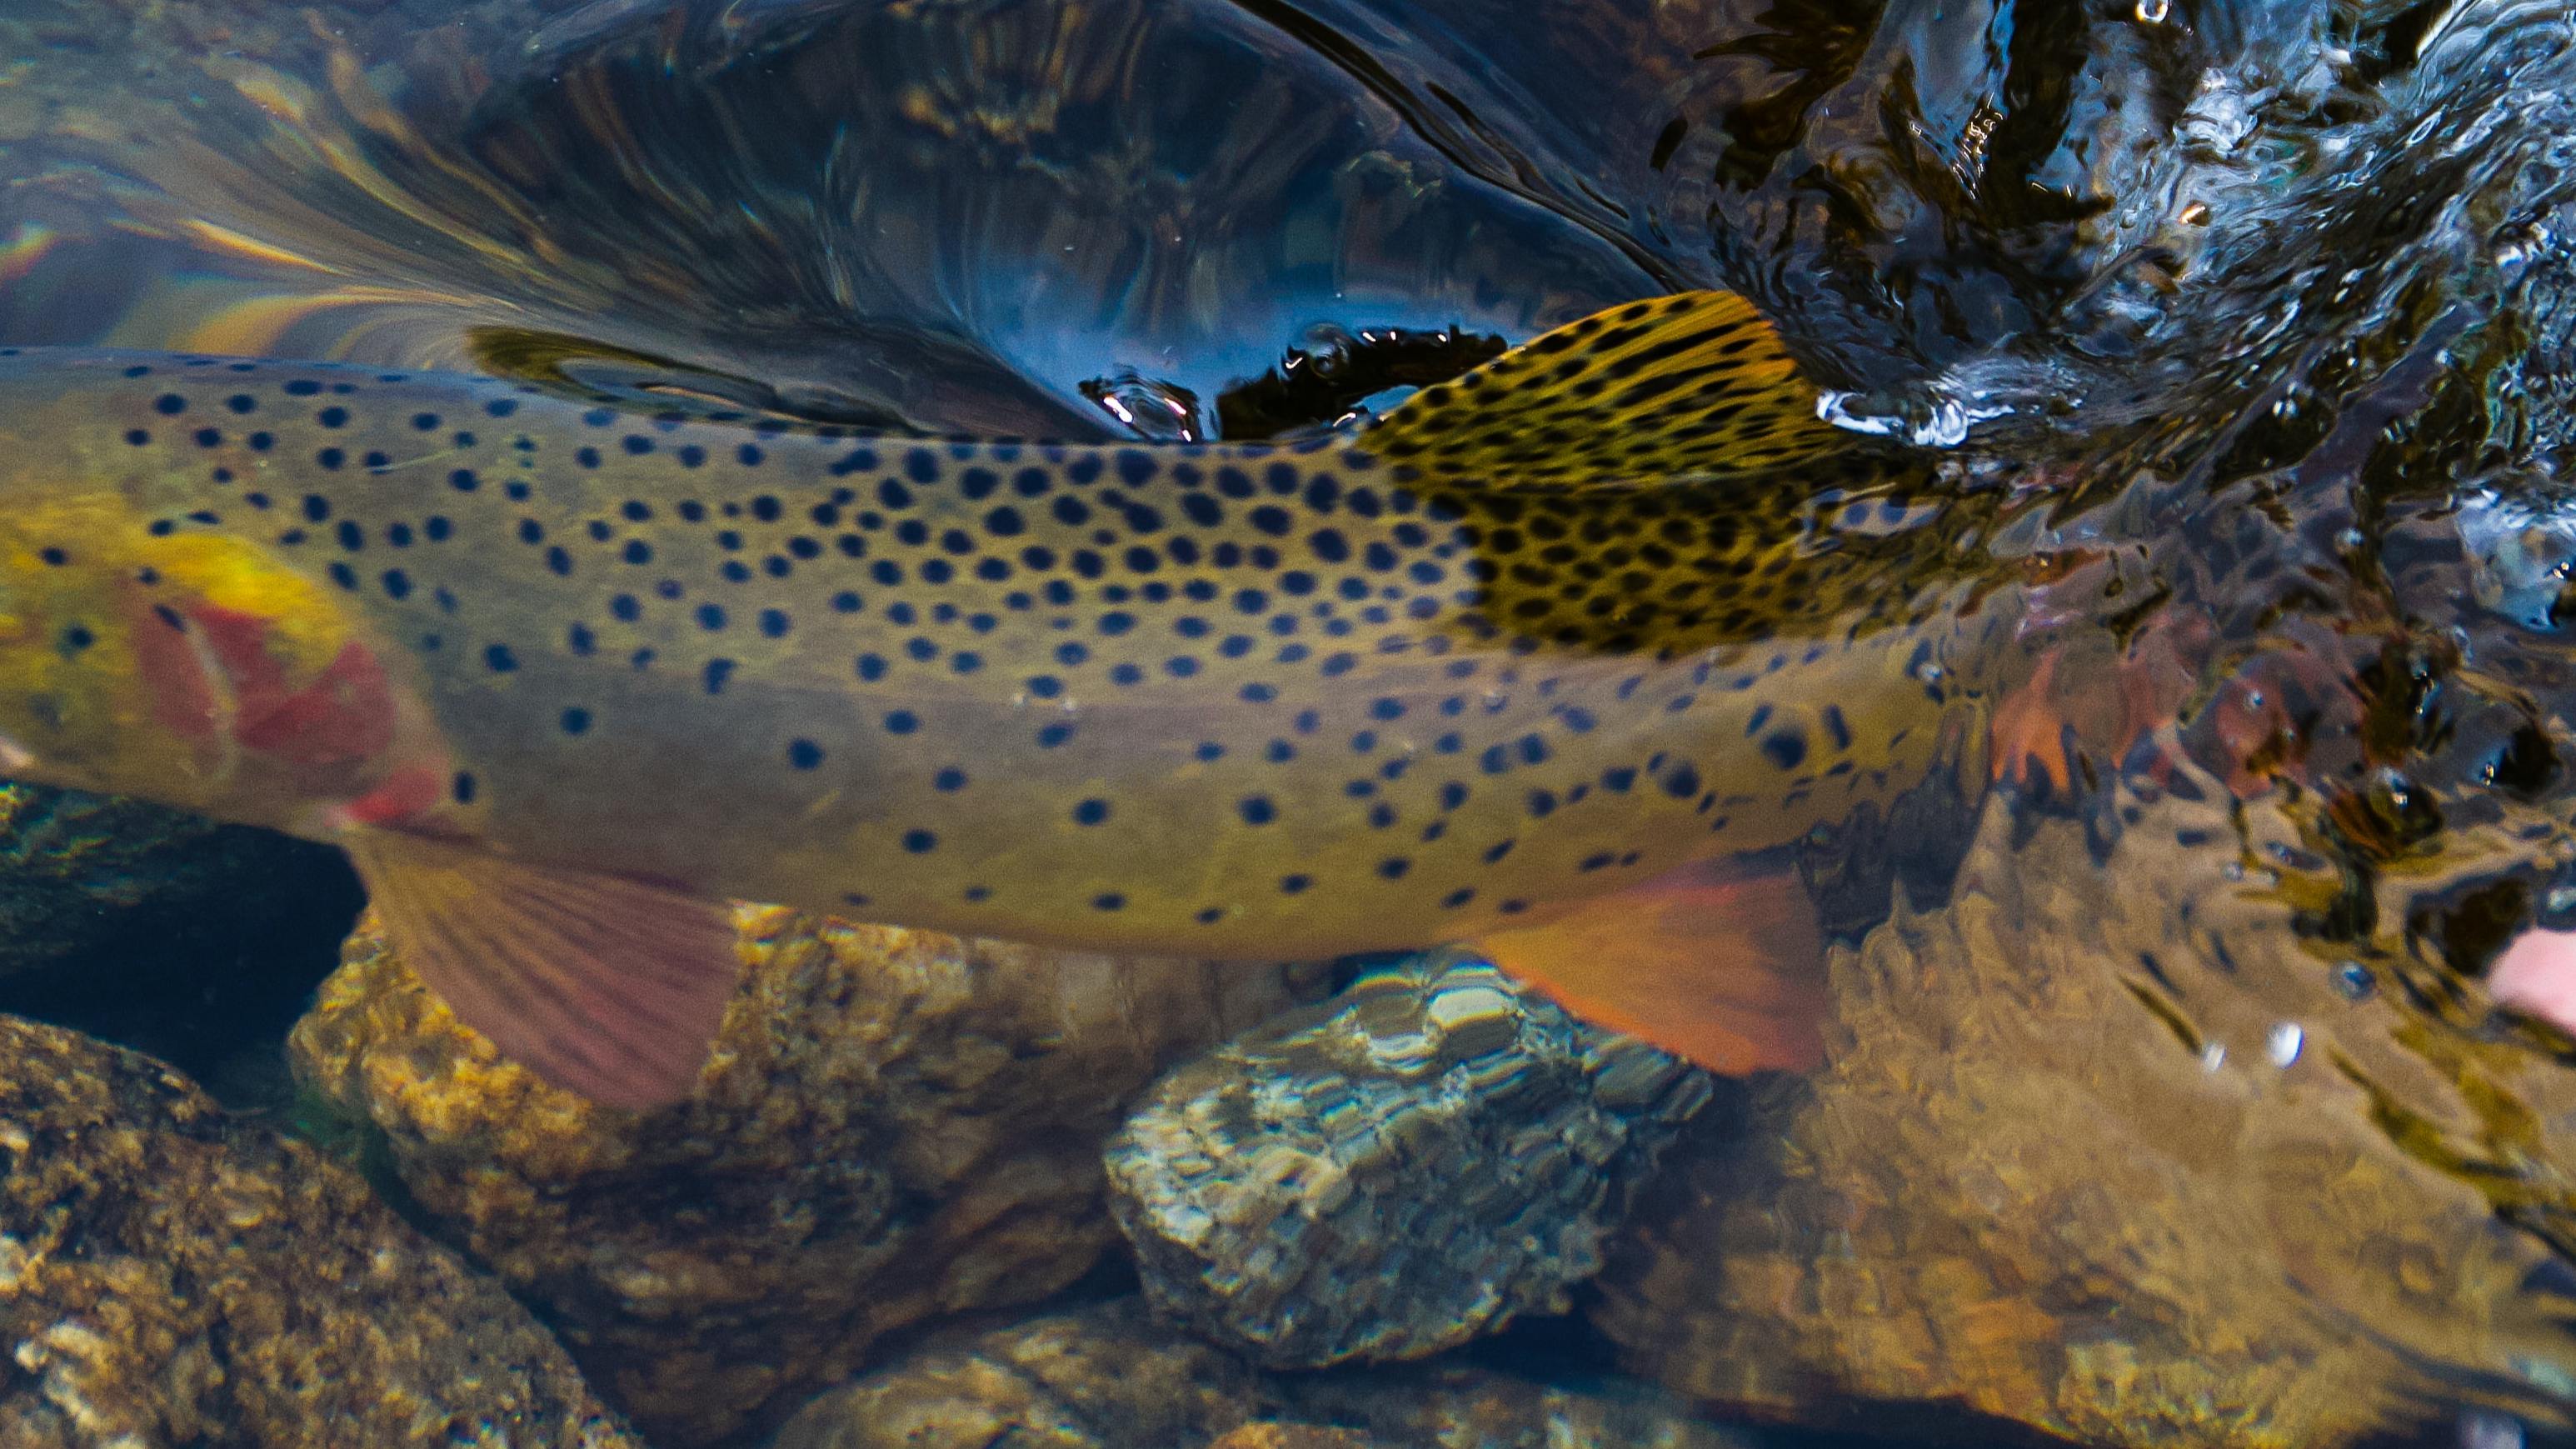 A trout being released into water.